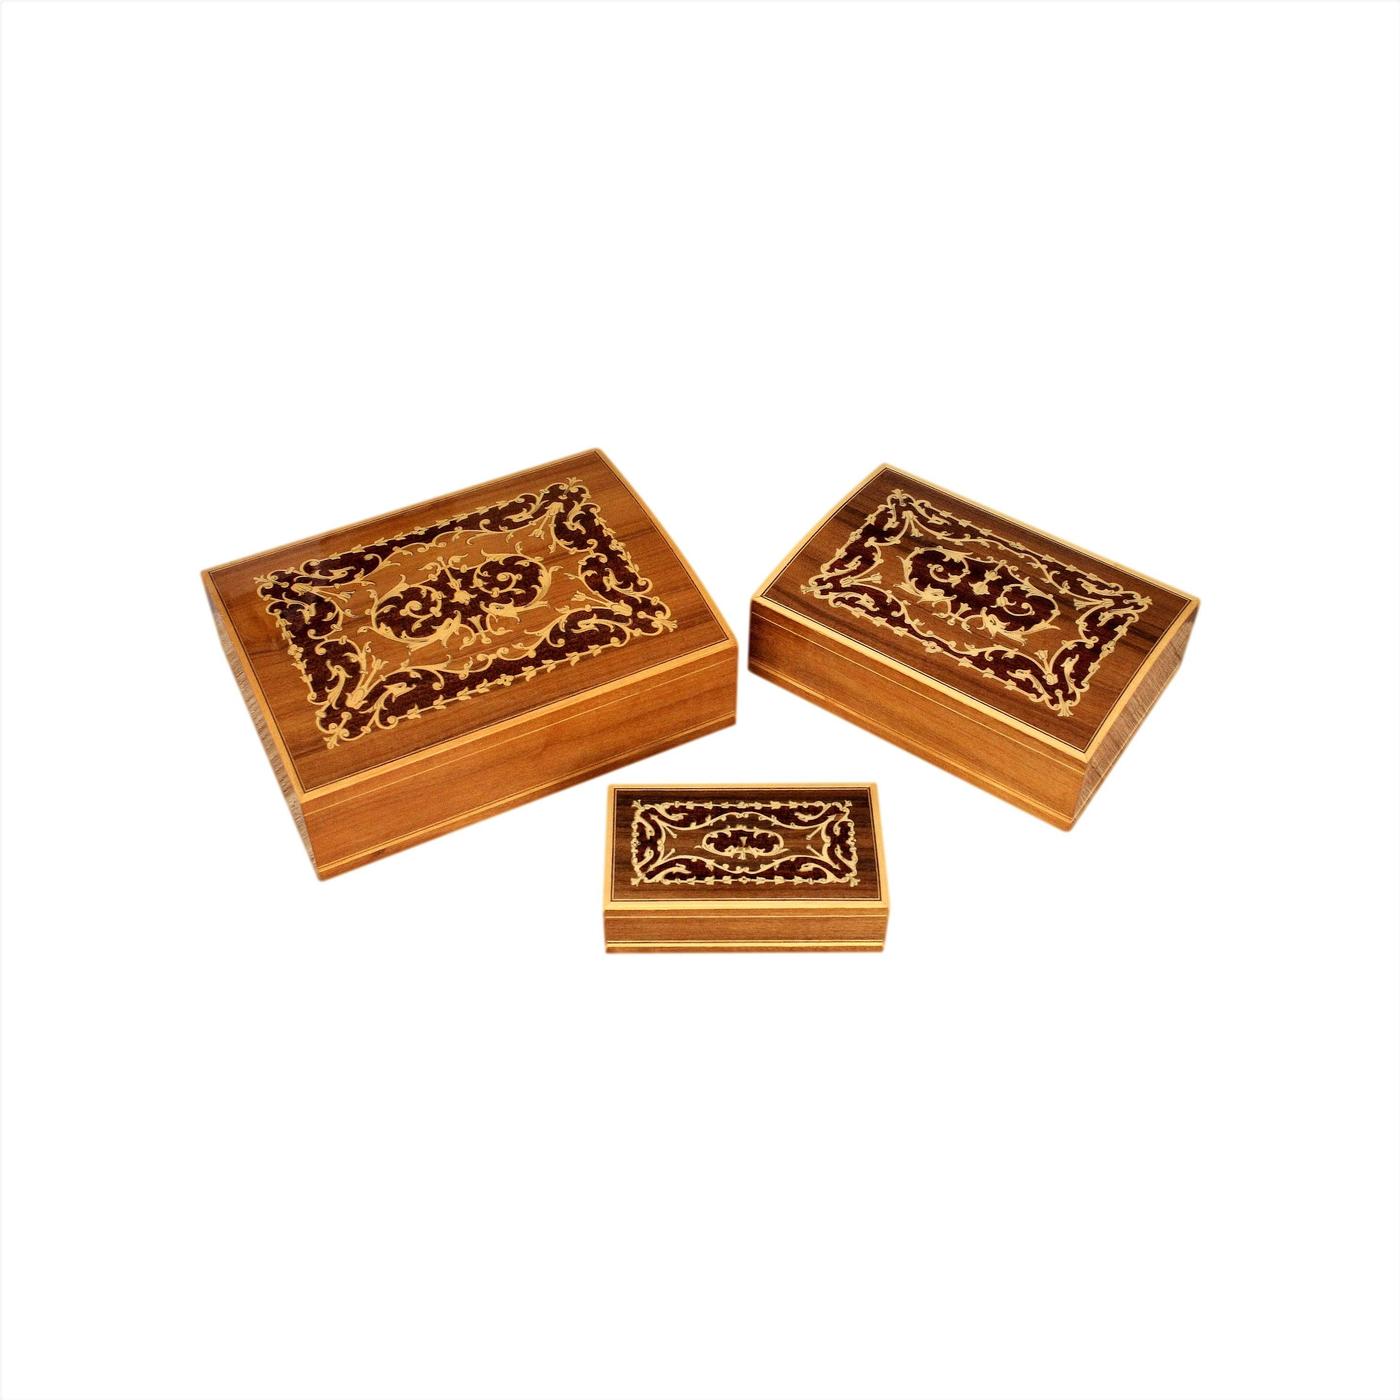 Three Marquetry Inlaid Italian Vintage Jewellery Boxes From Sorrento